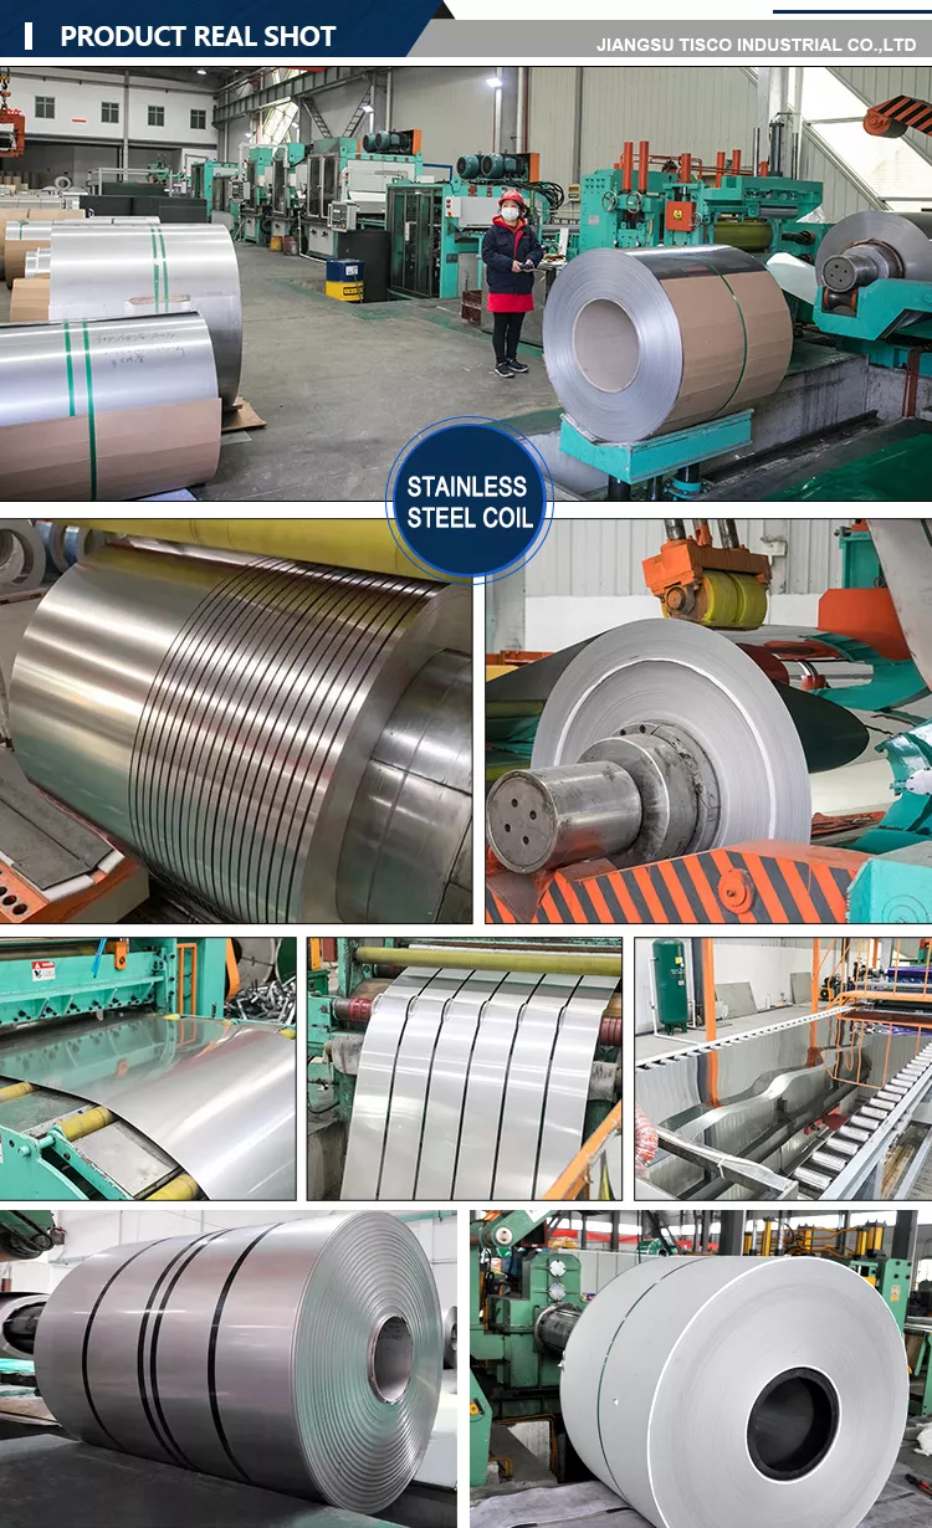 Image of 2205 Stainless Steel Coil